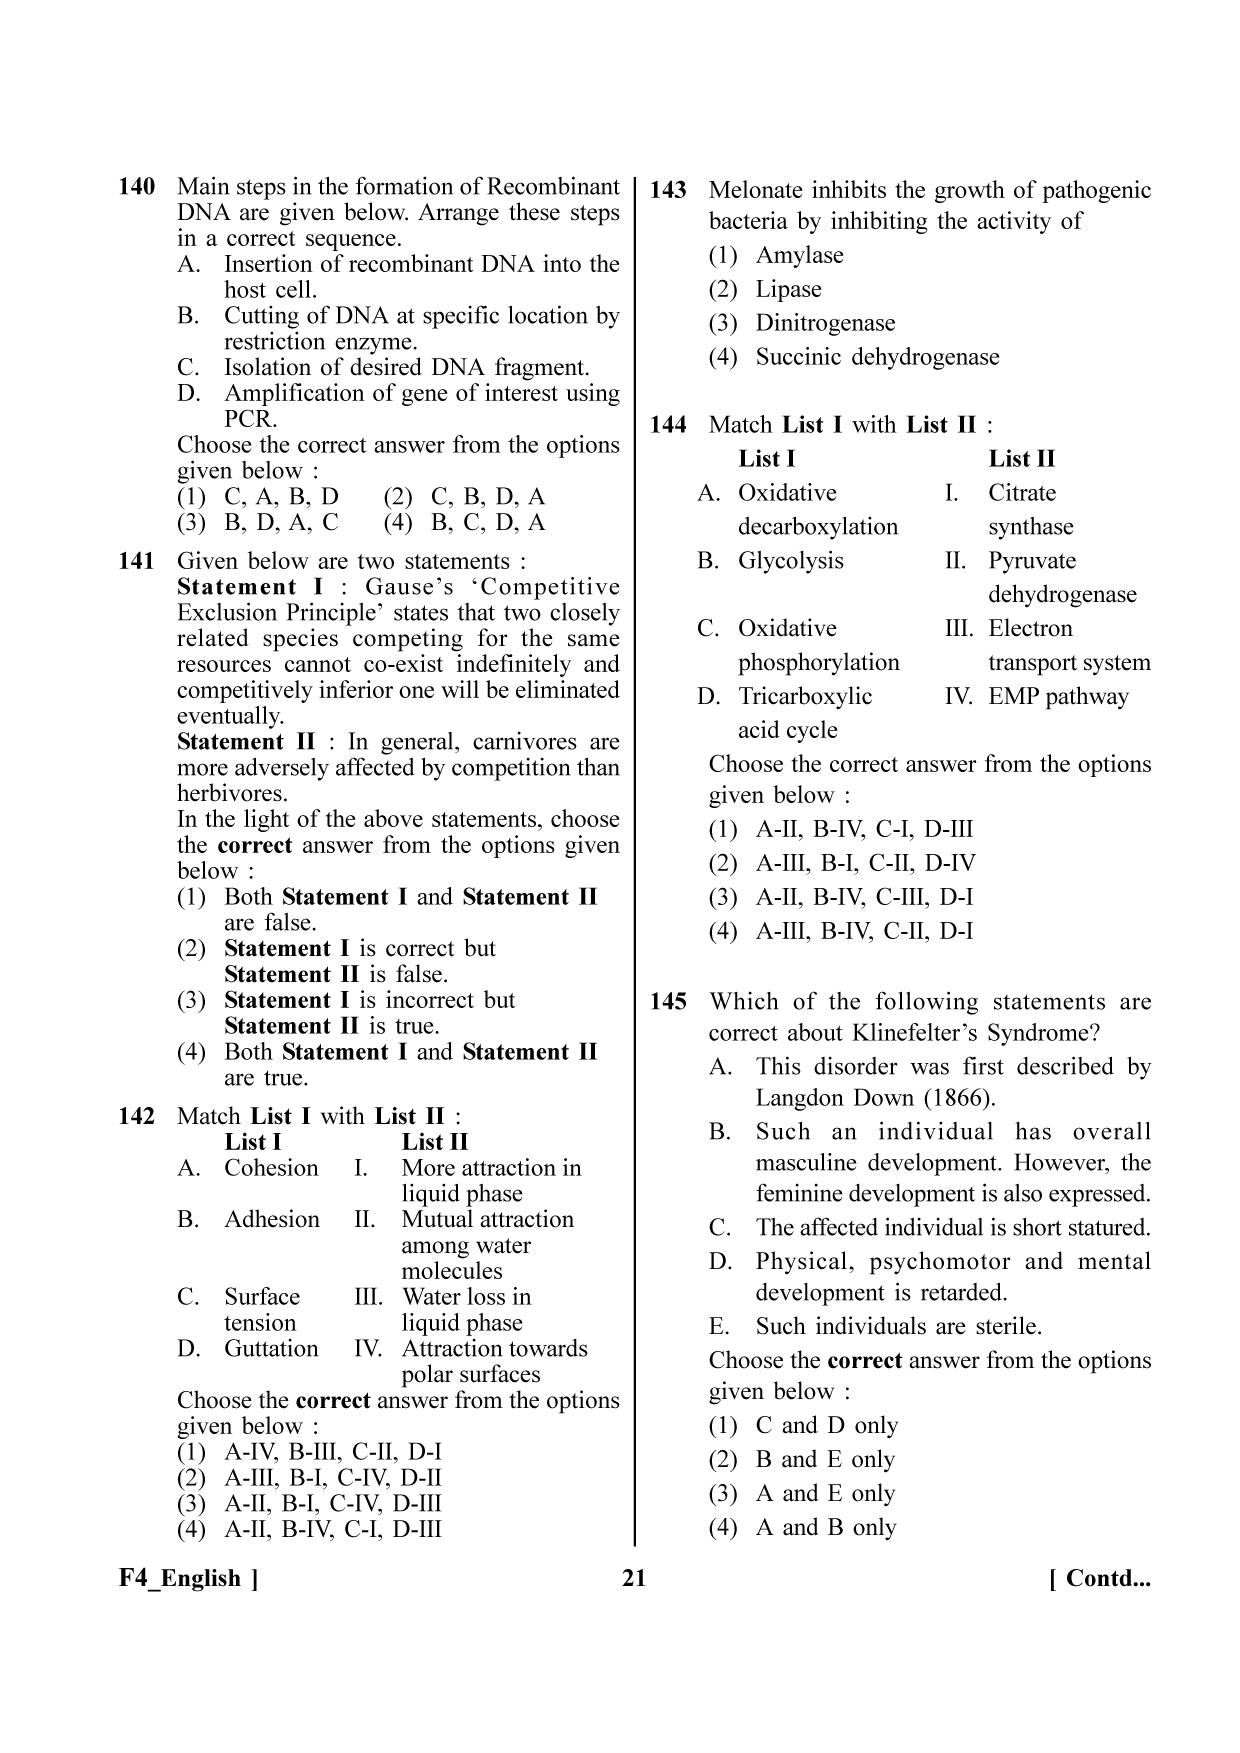 NEET 2023 F4 Question Paper - Page 21